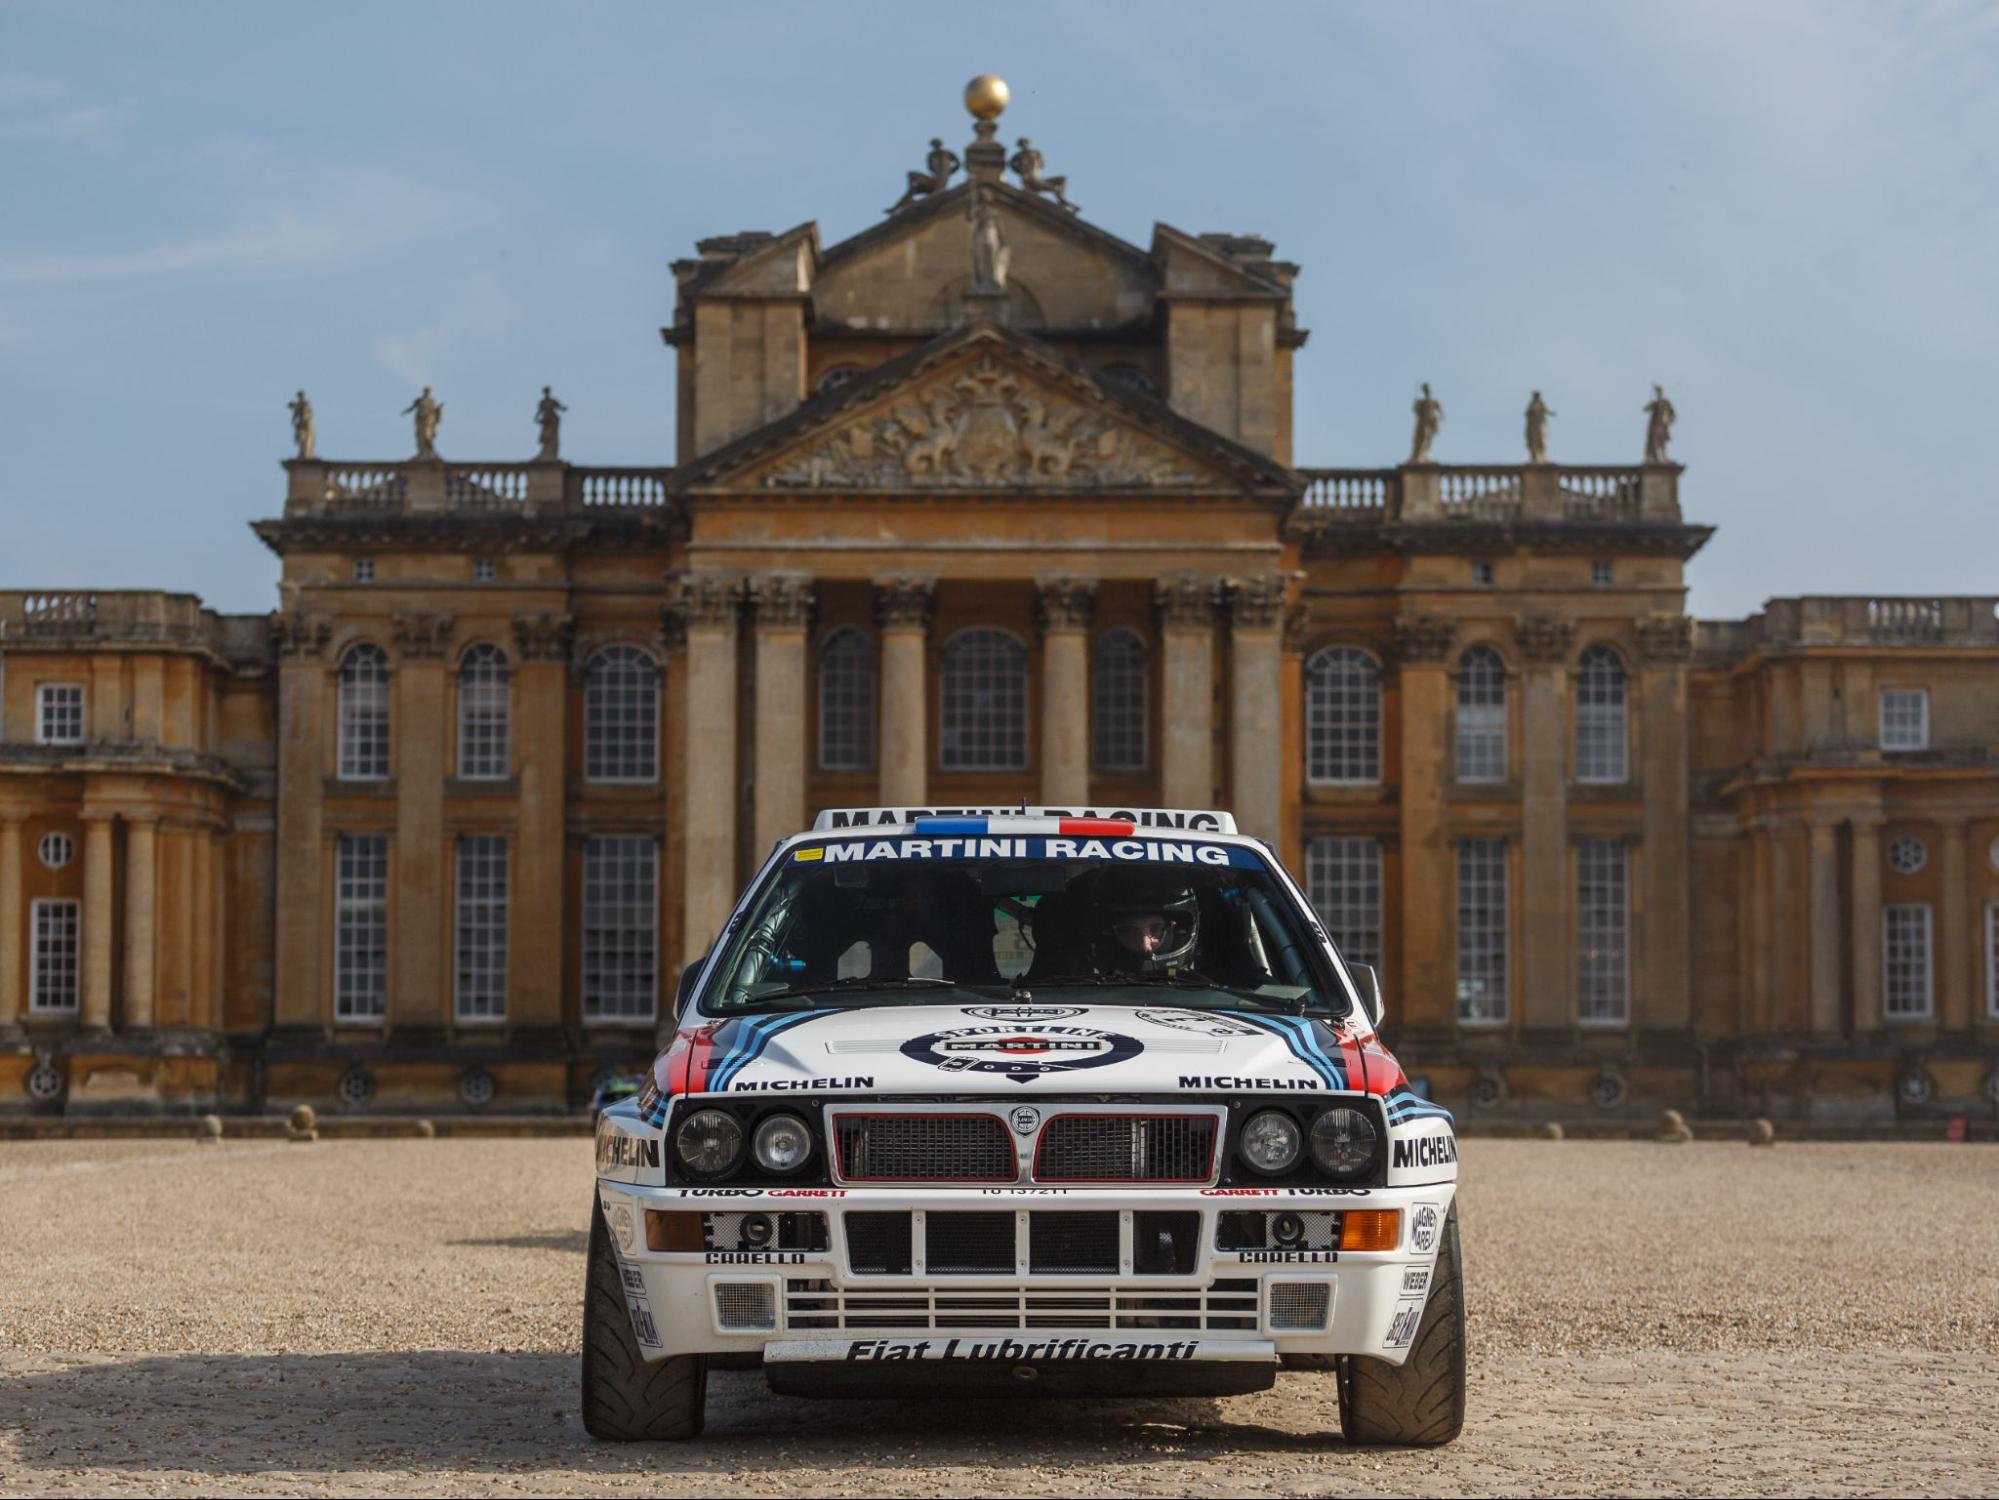 Lancia Delta Integrale GrA as part of the tribute to World Rally Champions